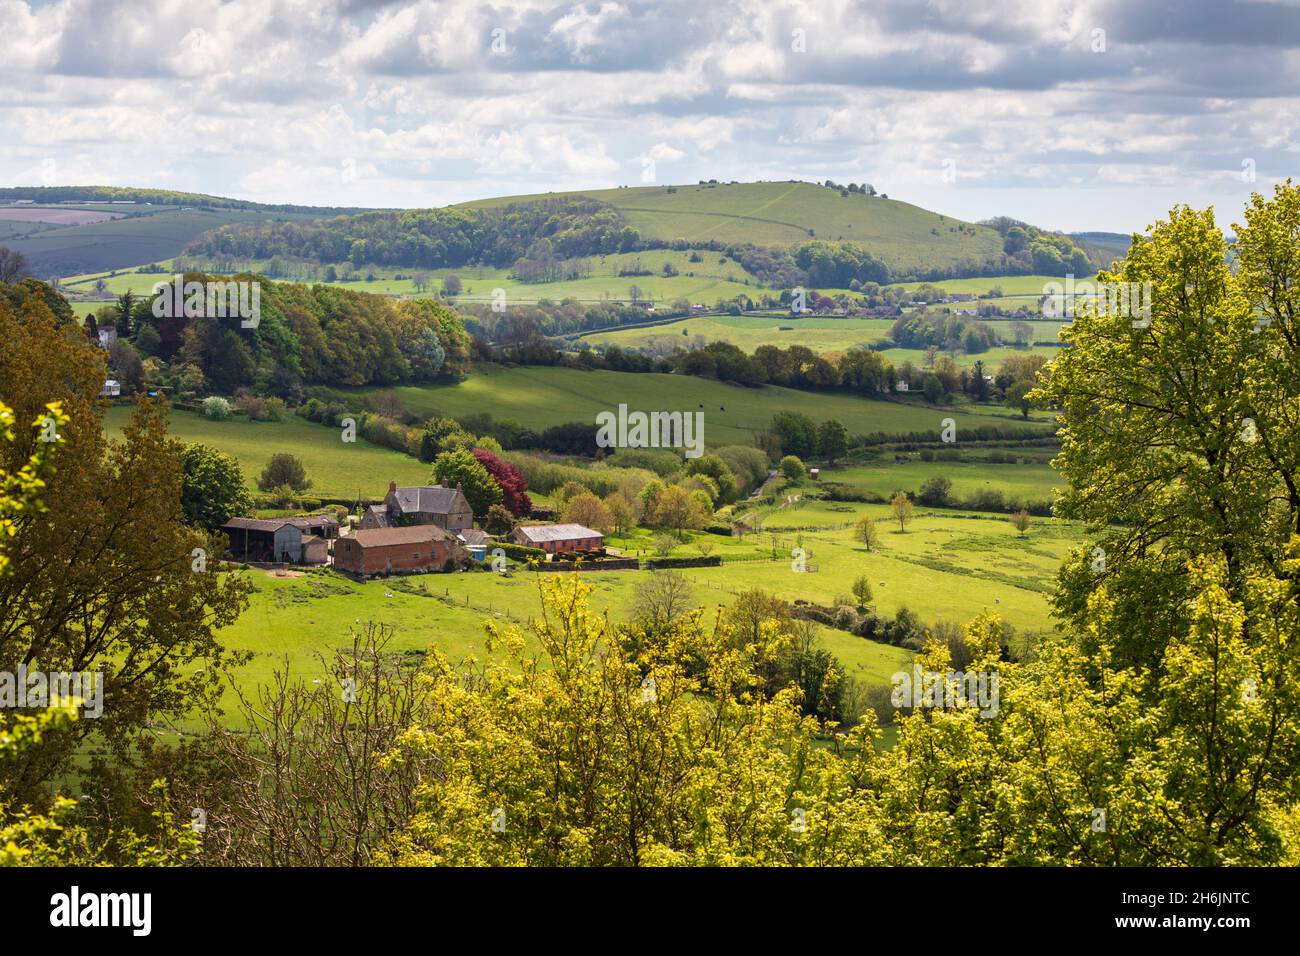 View from Shaftesbury over Cranborne Chase AONB (Area of Outstanding Natural Beauty) scenery to Melbury Beacon, Shaftesbury, Dorset, England Stock Photo